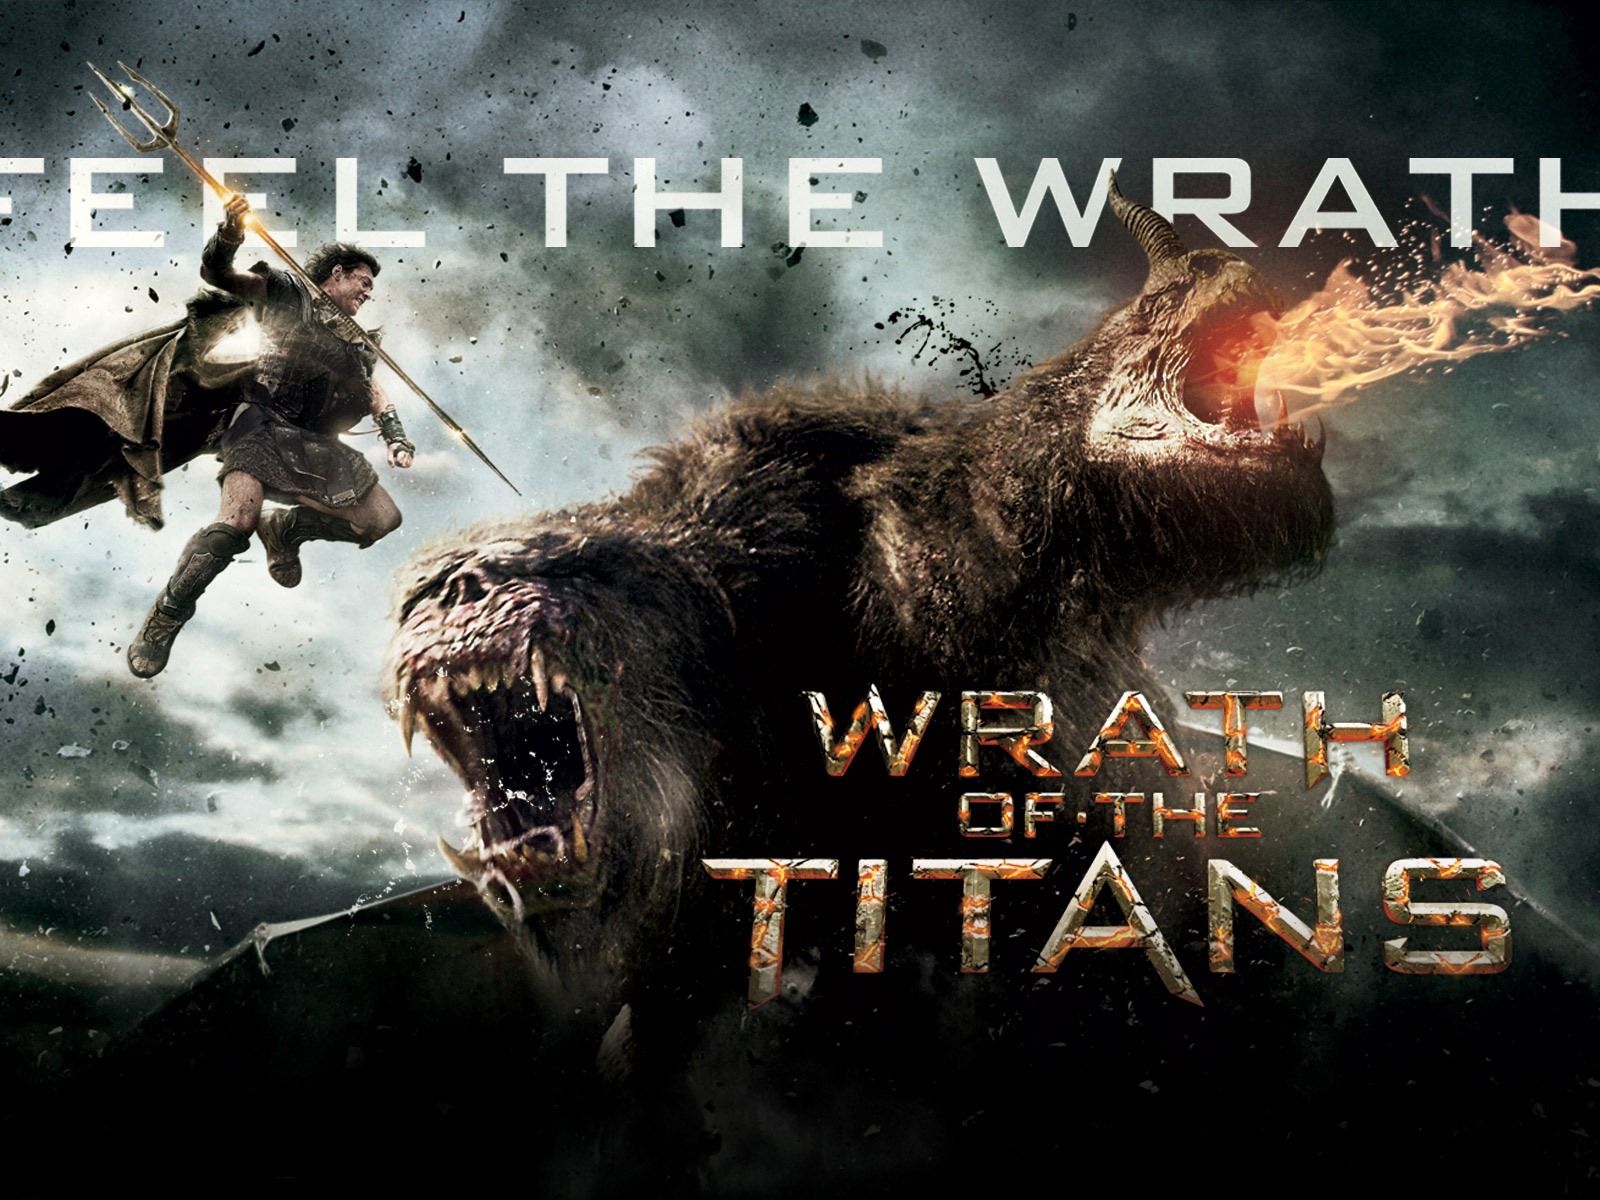 Wrath of the Titans HD wallpapers #1 - 1600x1200